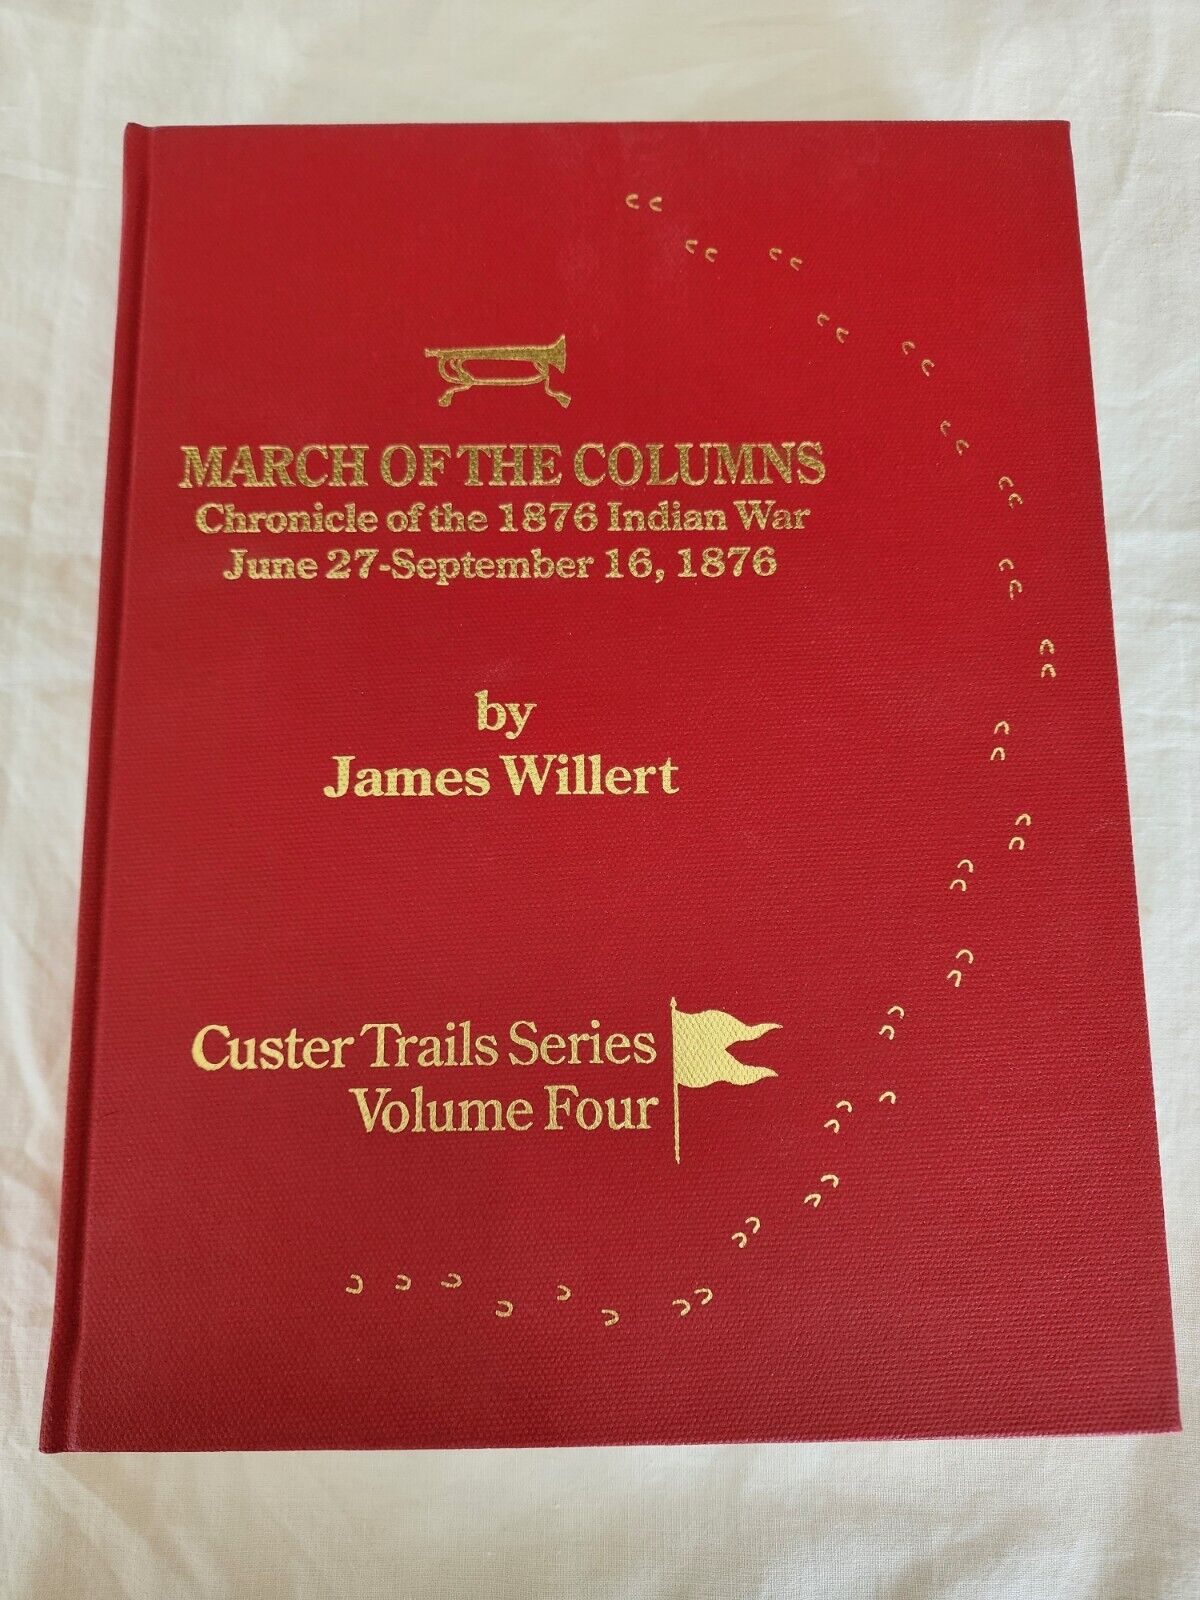 March of the Columns: Chronicle of the 1876 Indian war by James Willert